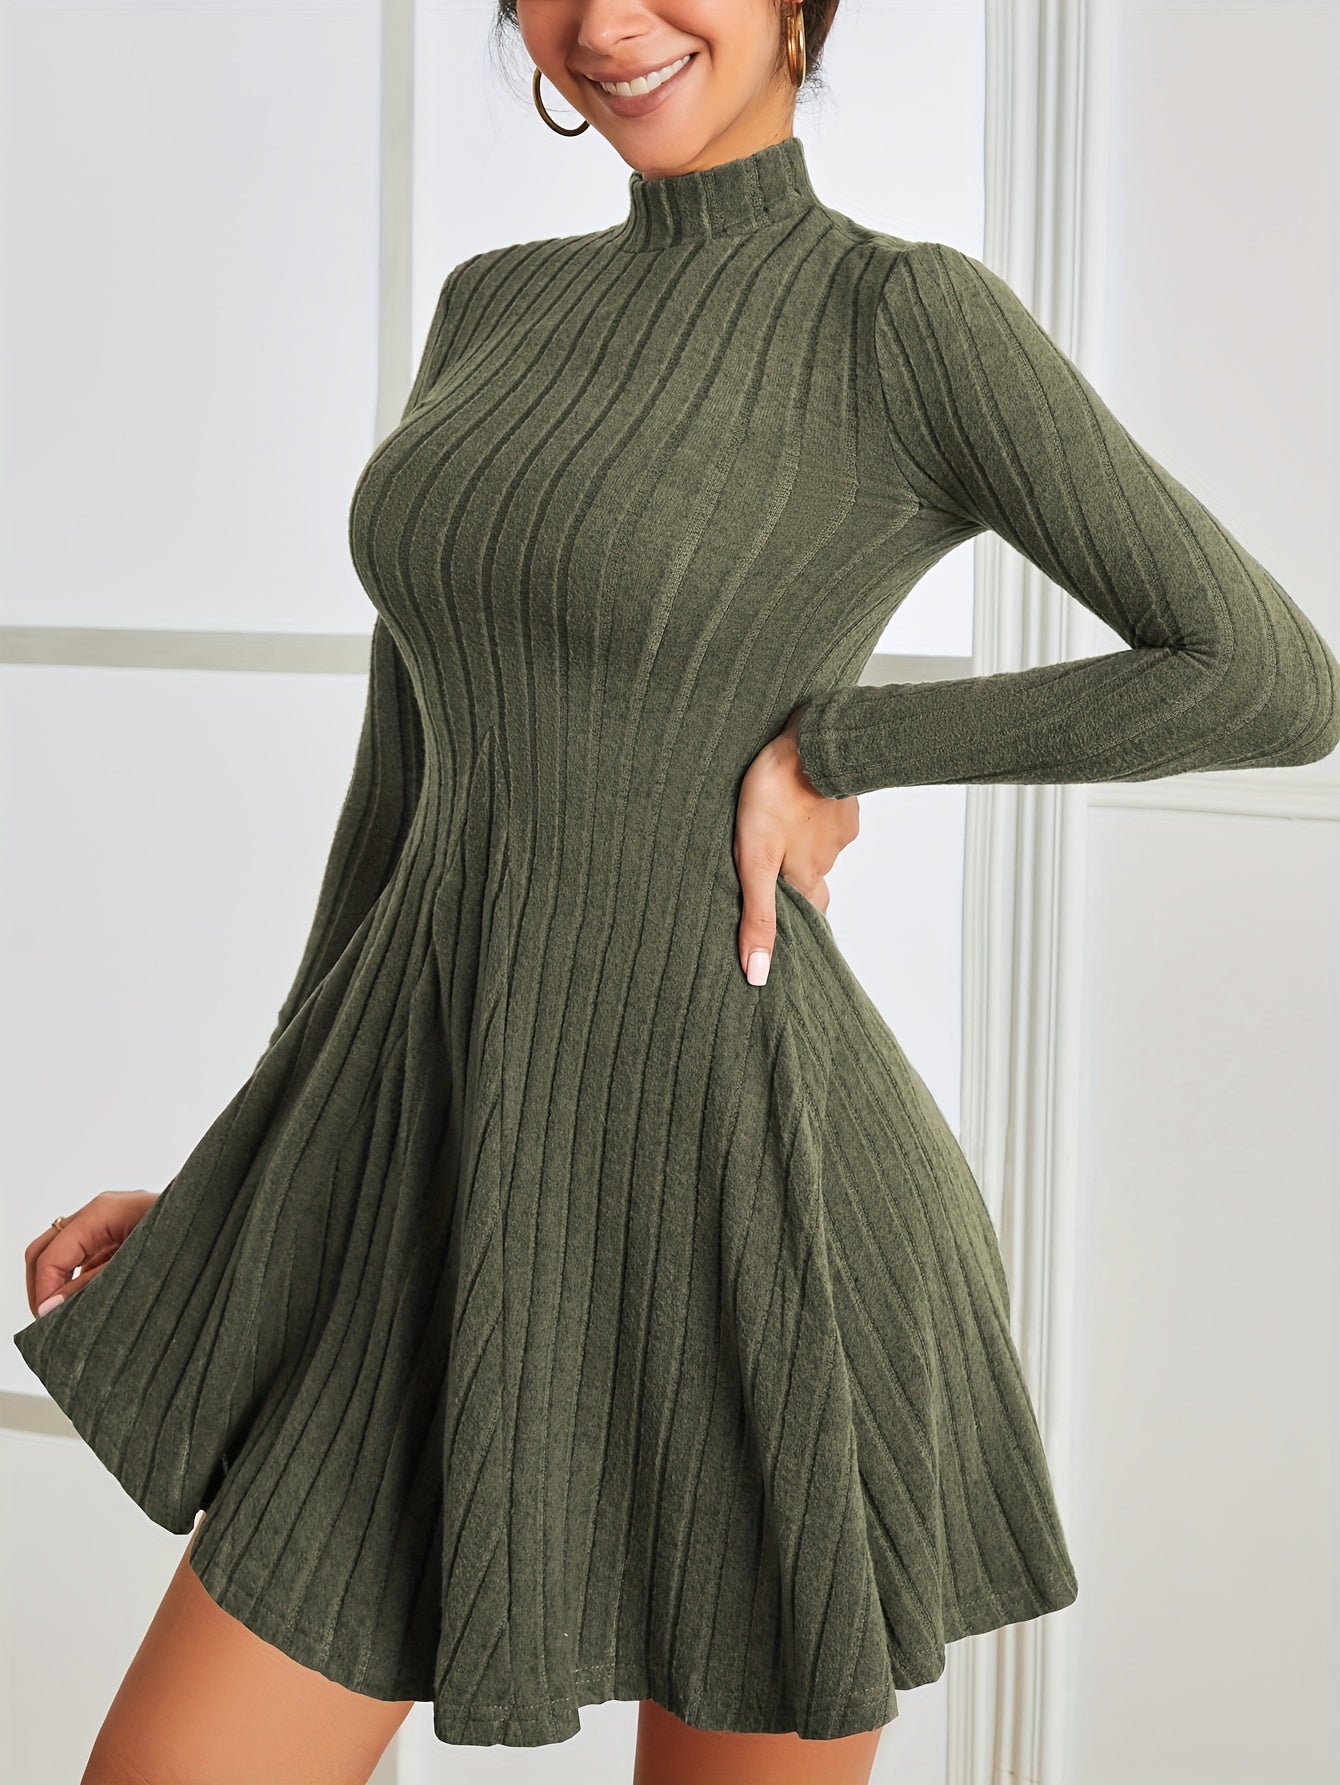 Antmvs Solid Ribbed Dress, Casual Mock Neck Long Sleeve Dress, Women's Clothing